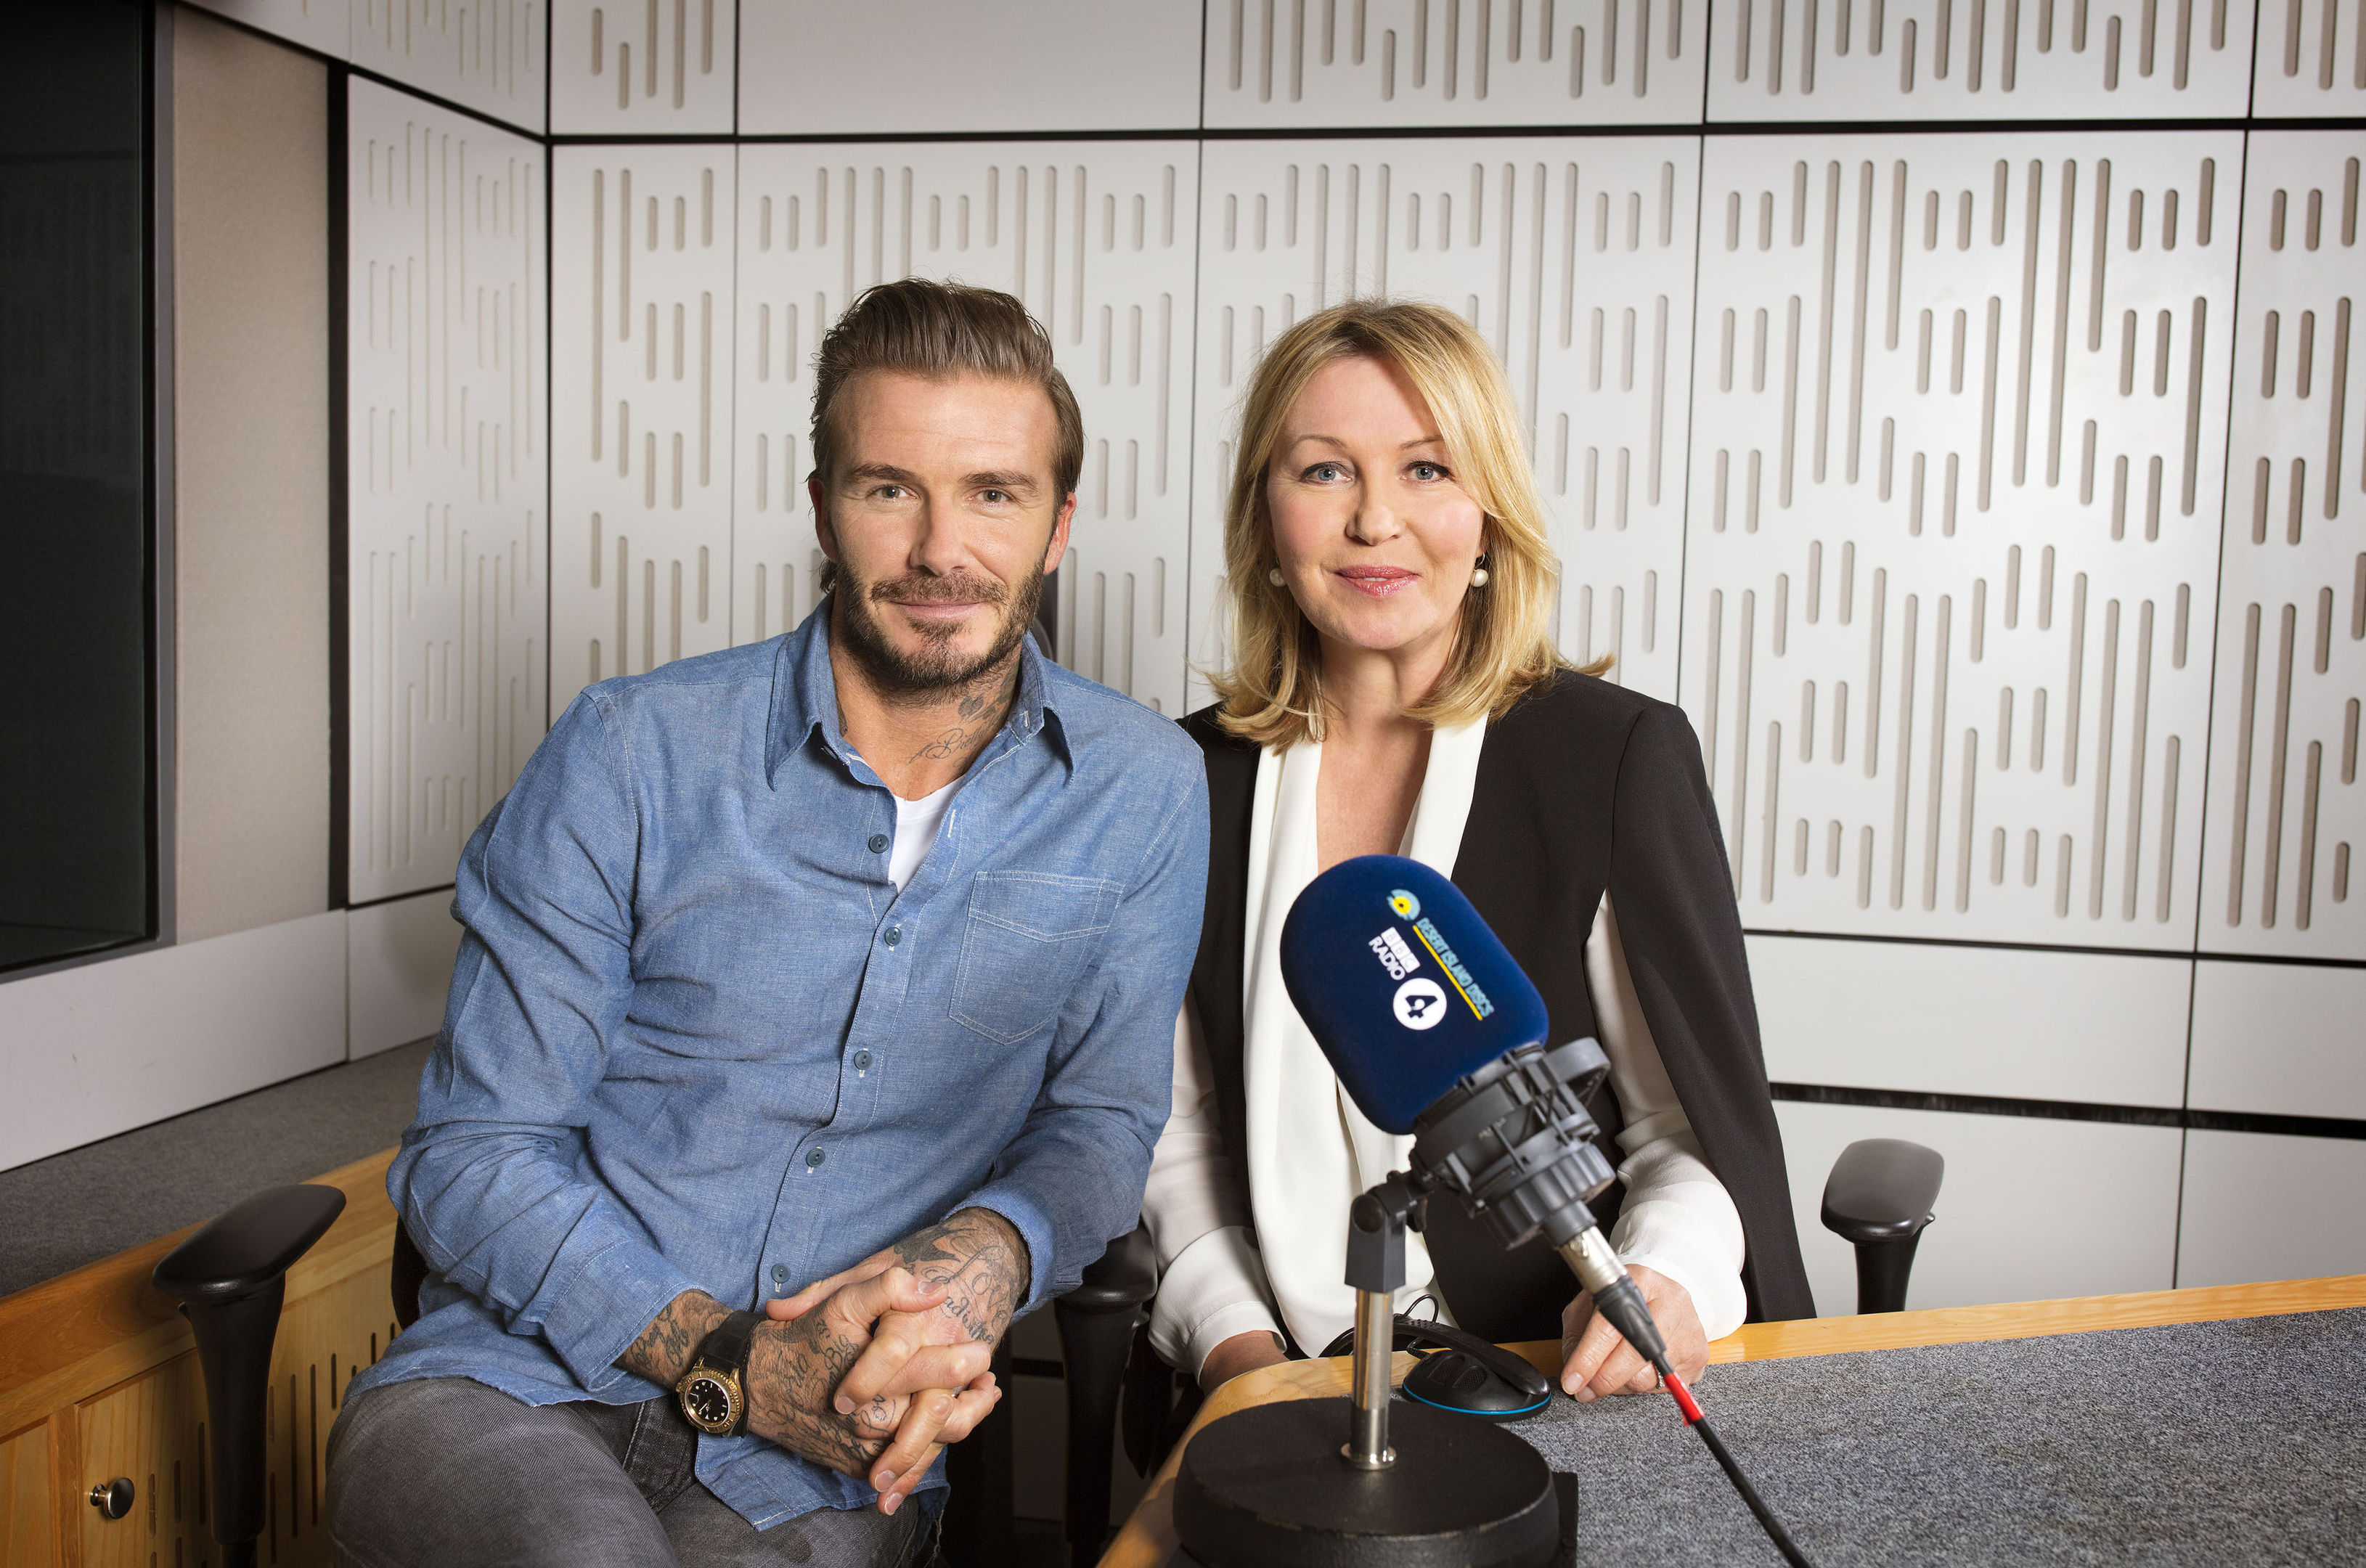 Kirsty Young with David Beckham as he joins Desert Island Discs for the programme's 75th anniversary edition  on Sunday (Sophie Mutevelian/BBC/PA Wire